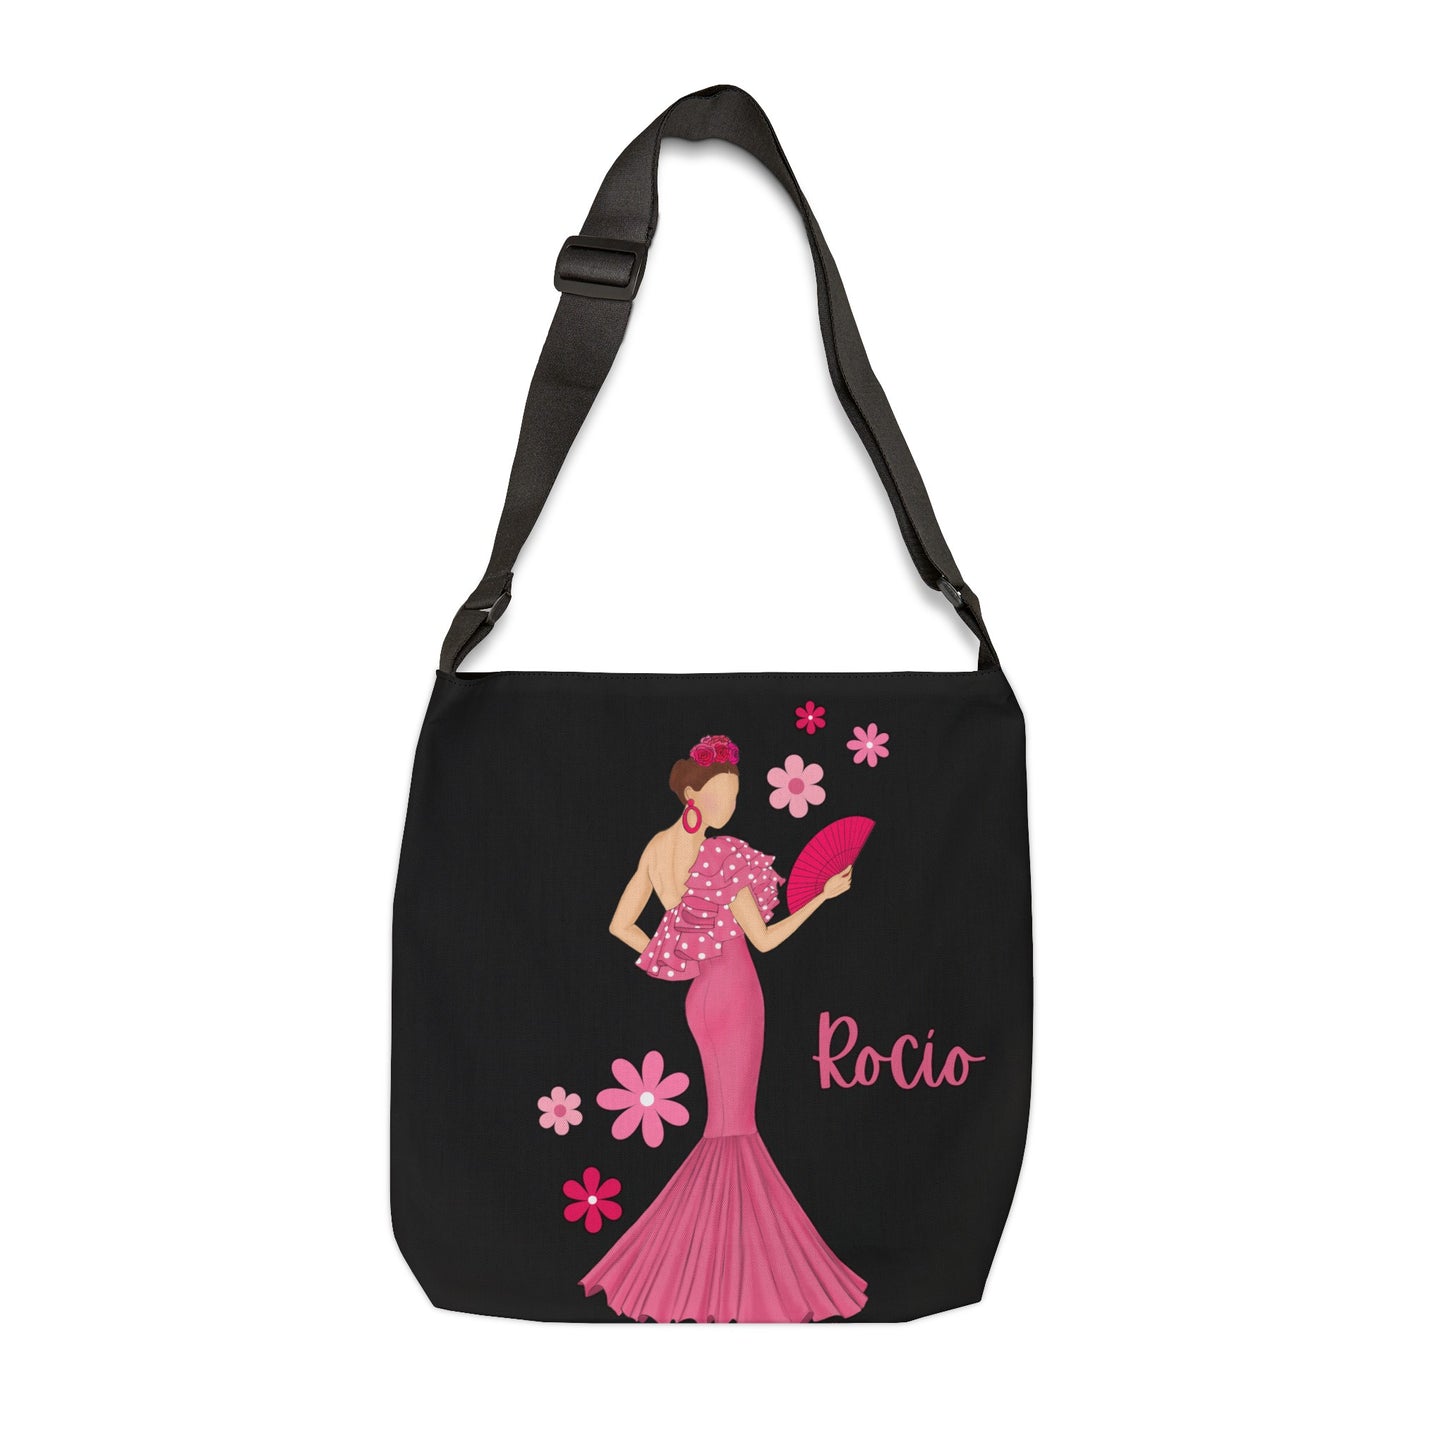 a black bag with a woman in a pink dress